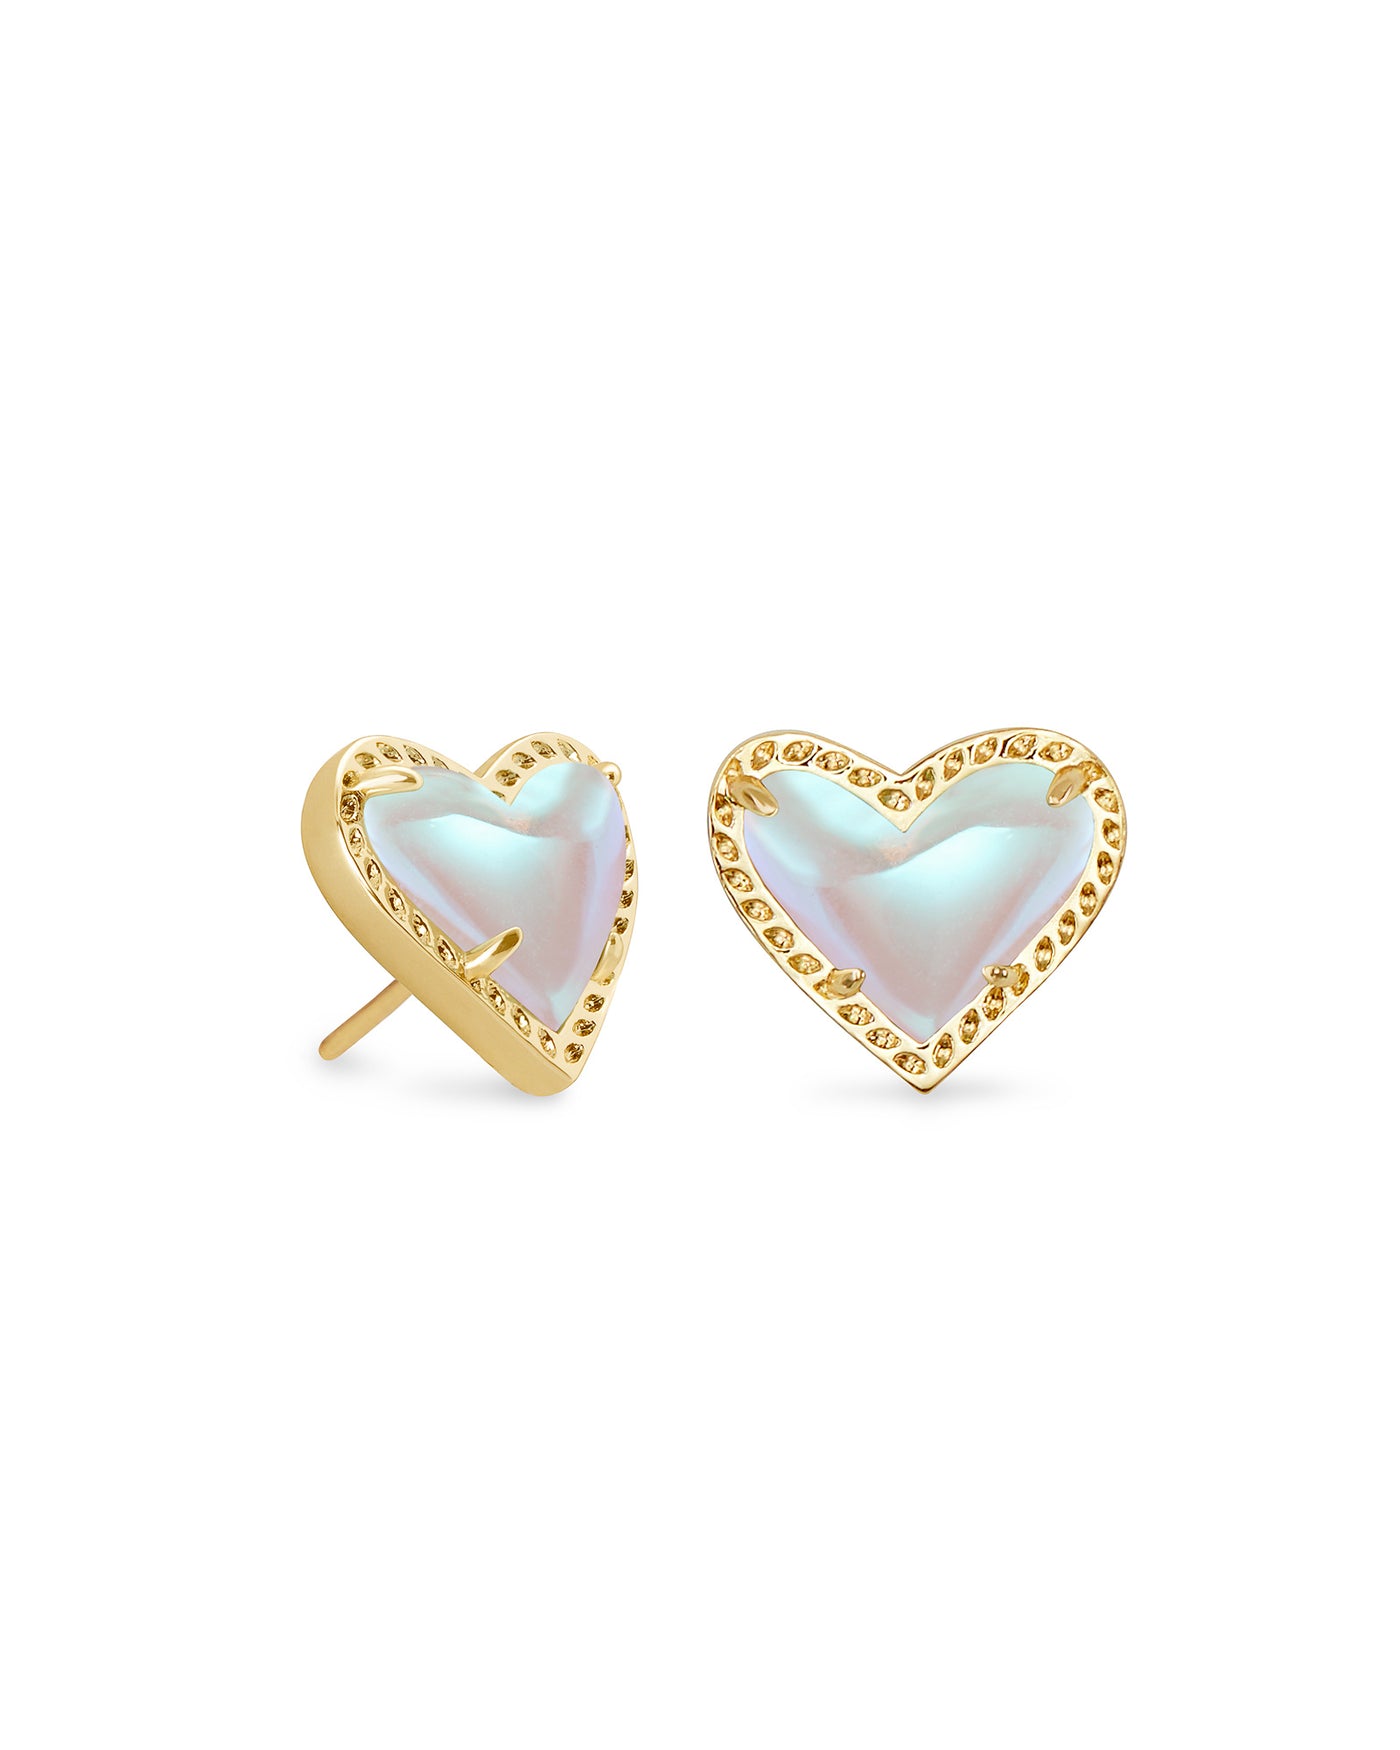 Kendra Scott Ari Heart Stud Earrings Gold Dichroic Glass-Earrings-Kendra Scott-Market Street Nest, Fashionable Clothing, Shoes and Home Décor Located in Mabank, TX